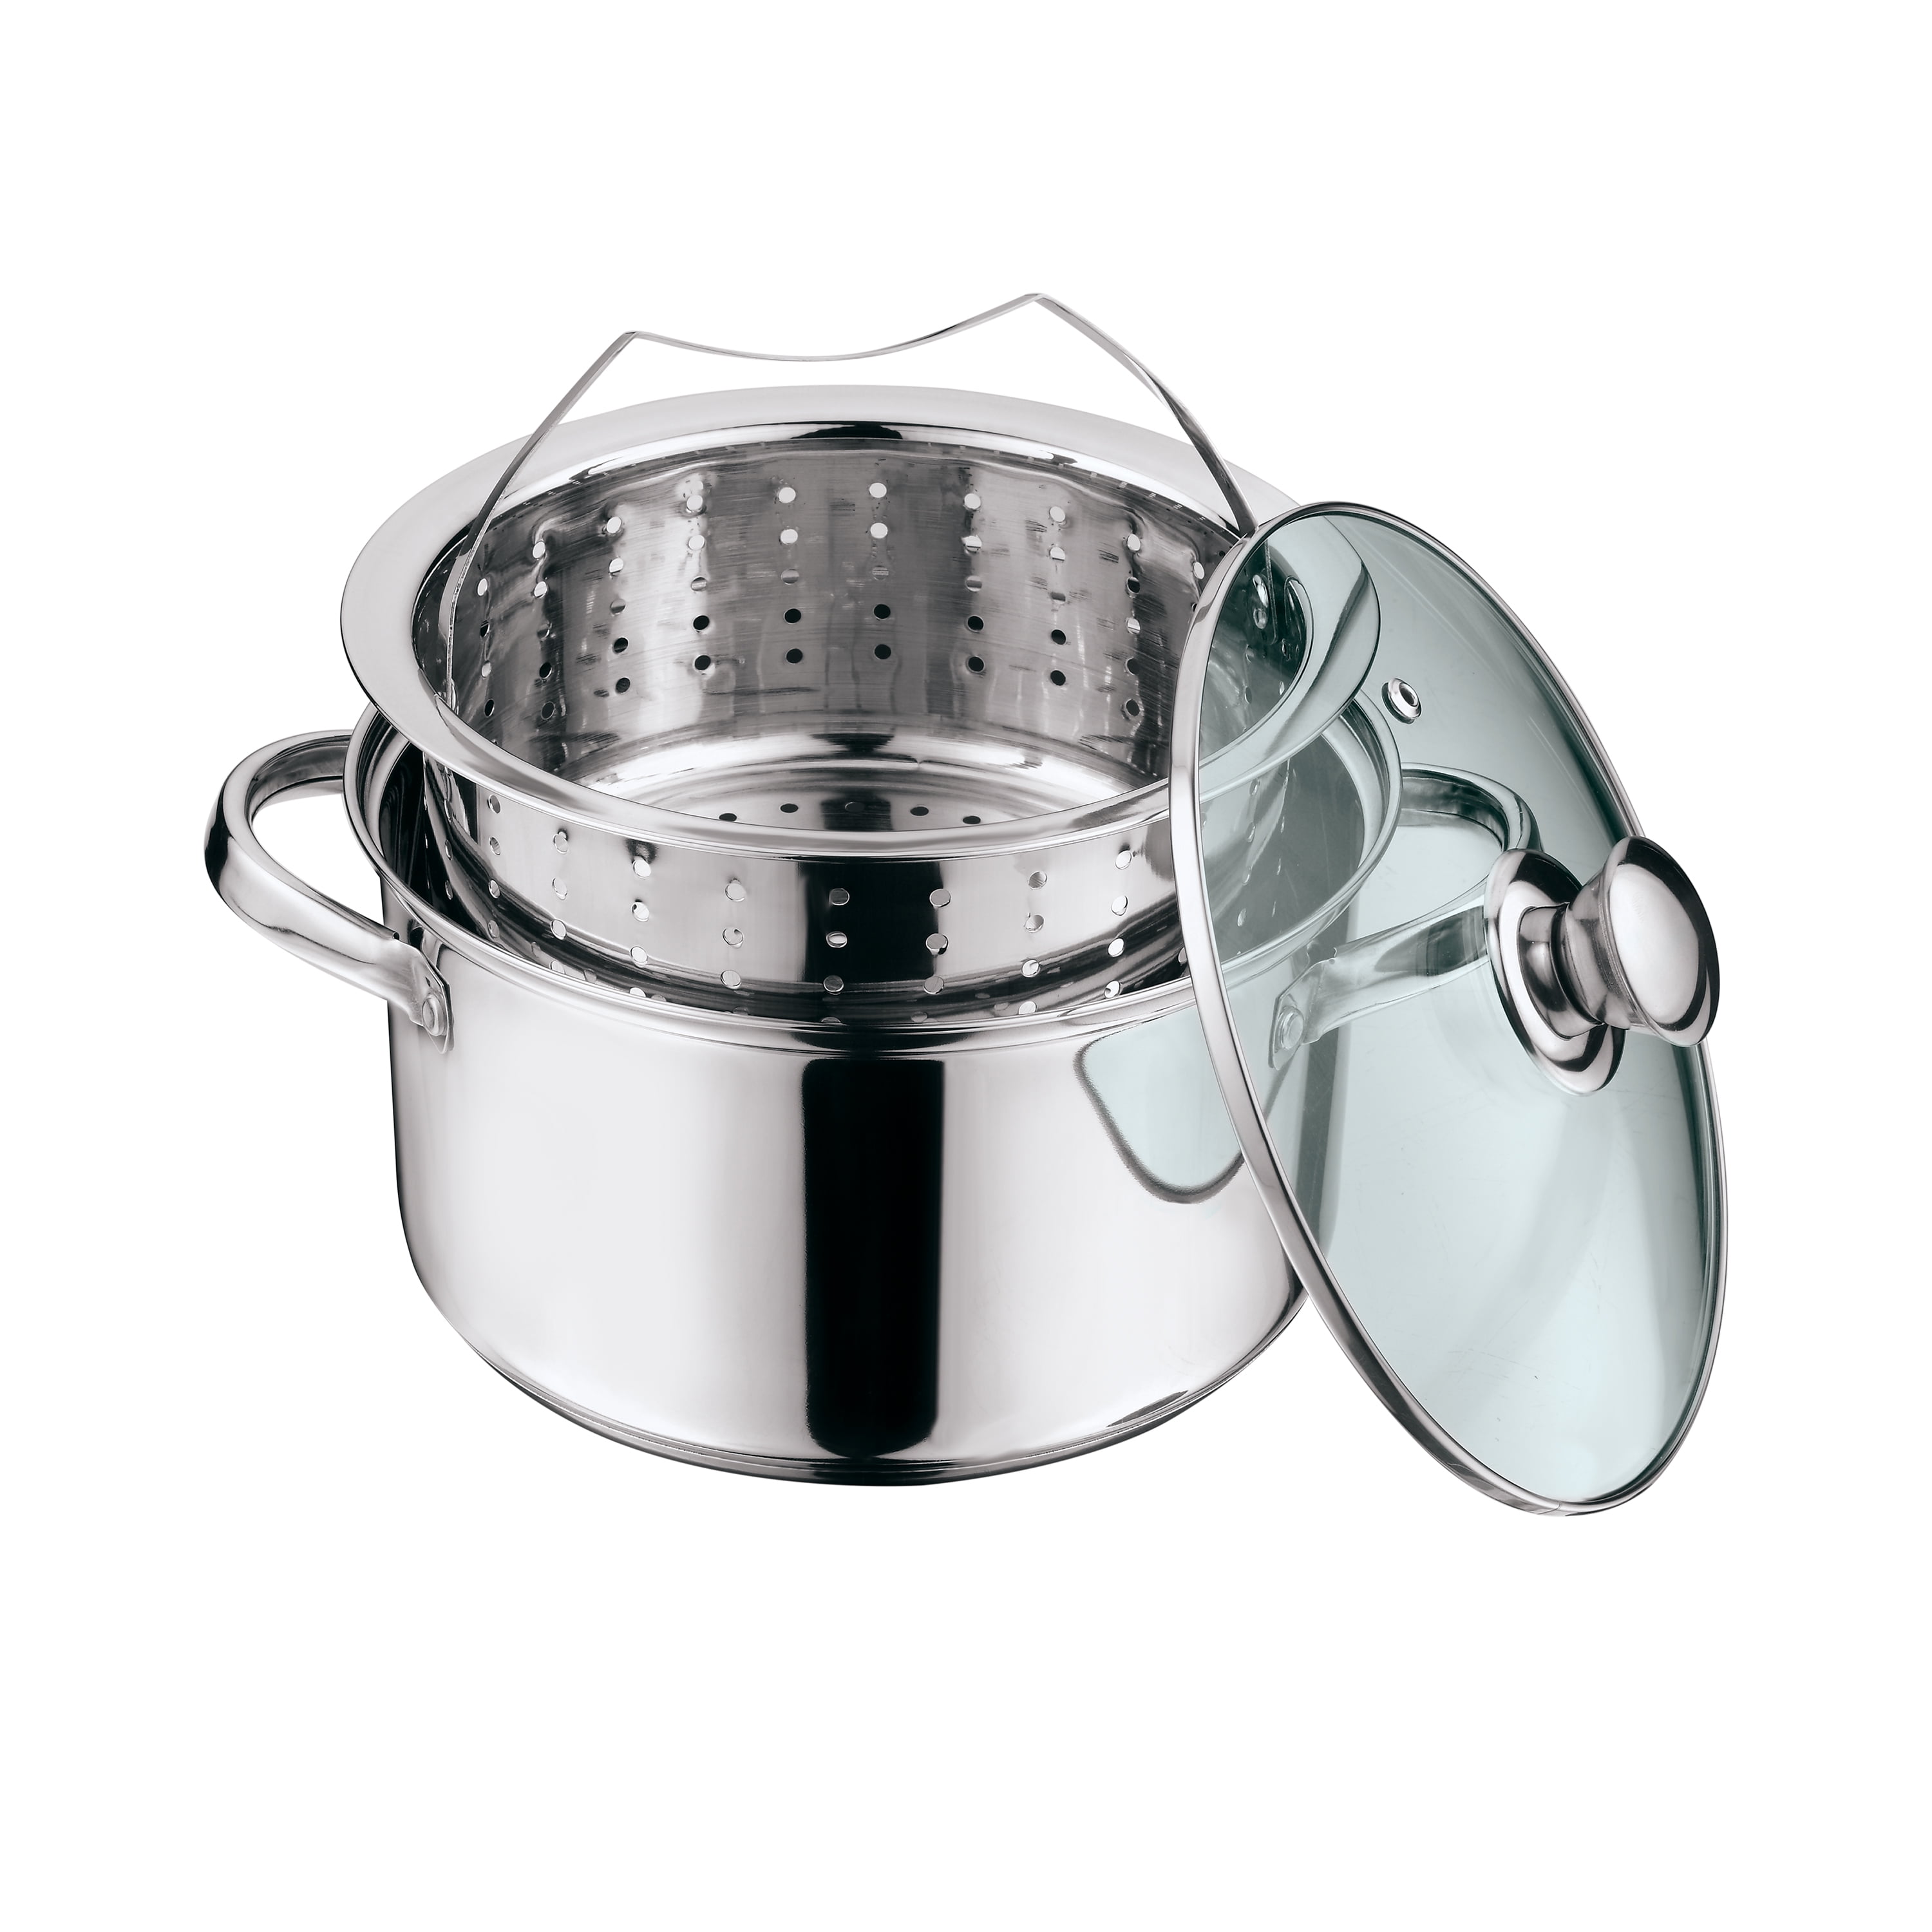 Mainstays Stainless Steel 1 Quart Sauce Pan with Lid 